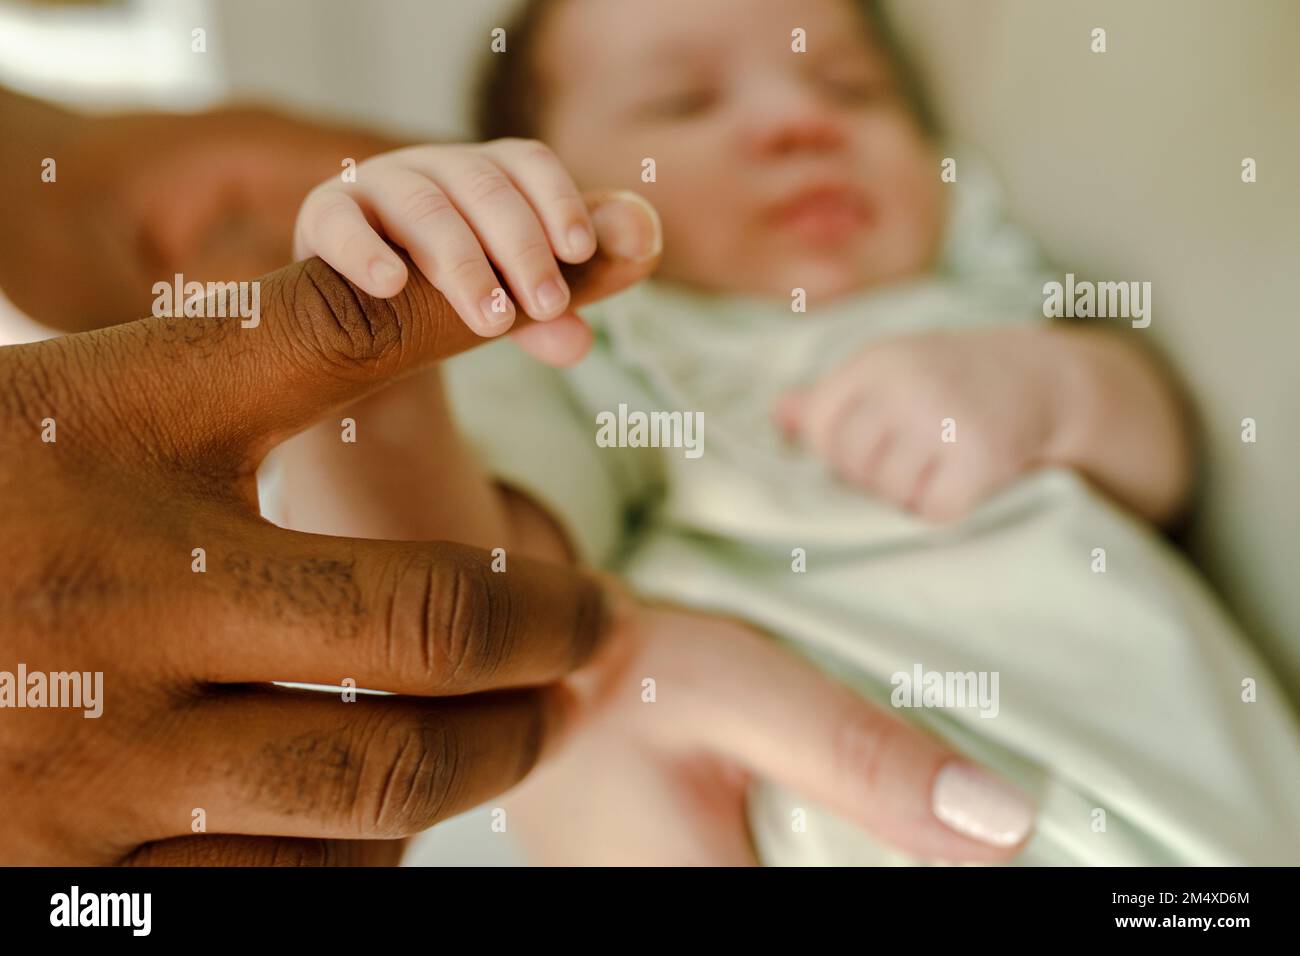 https://c8.alamy.com/comp/2M4XD6M/baby-girl-holding-finger-of-father-at-home-2M4XD6M.jpg